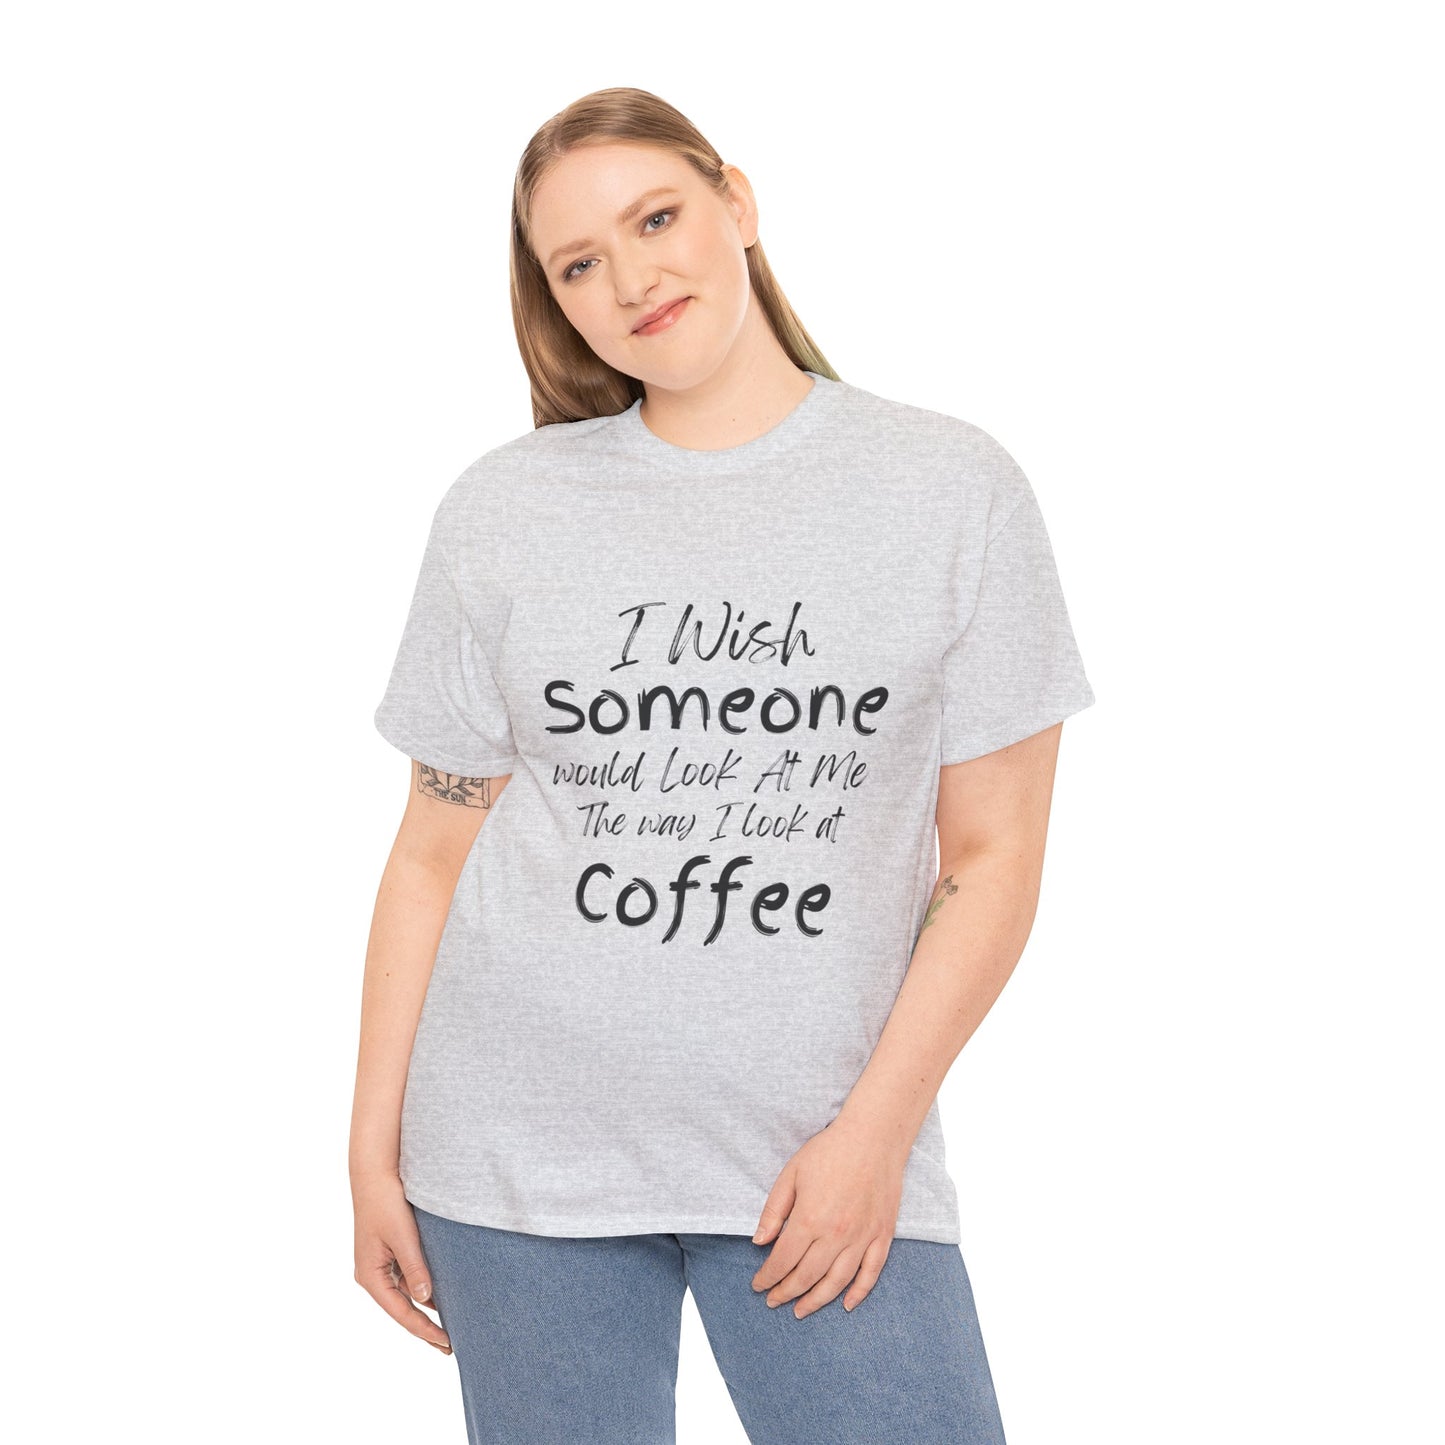 I Wish Someone Looked At Me The Way I Look At Coffee - Adult Unisex Cotton Tee